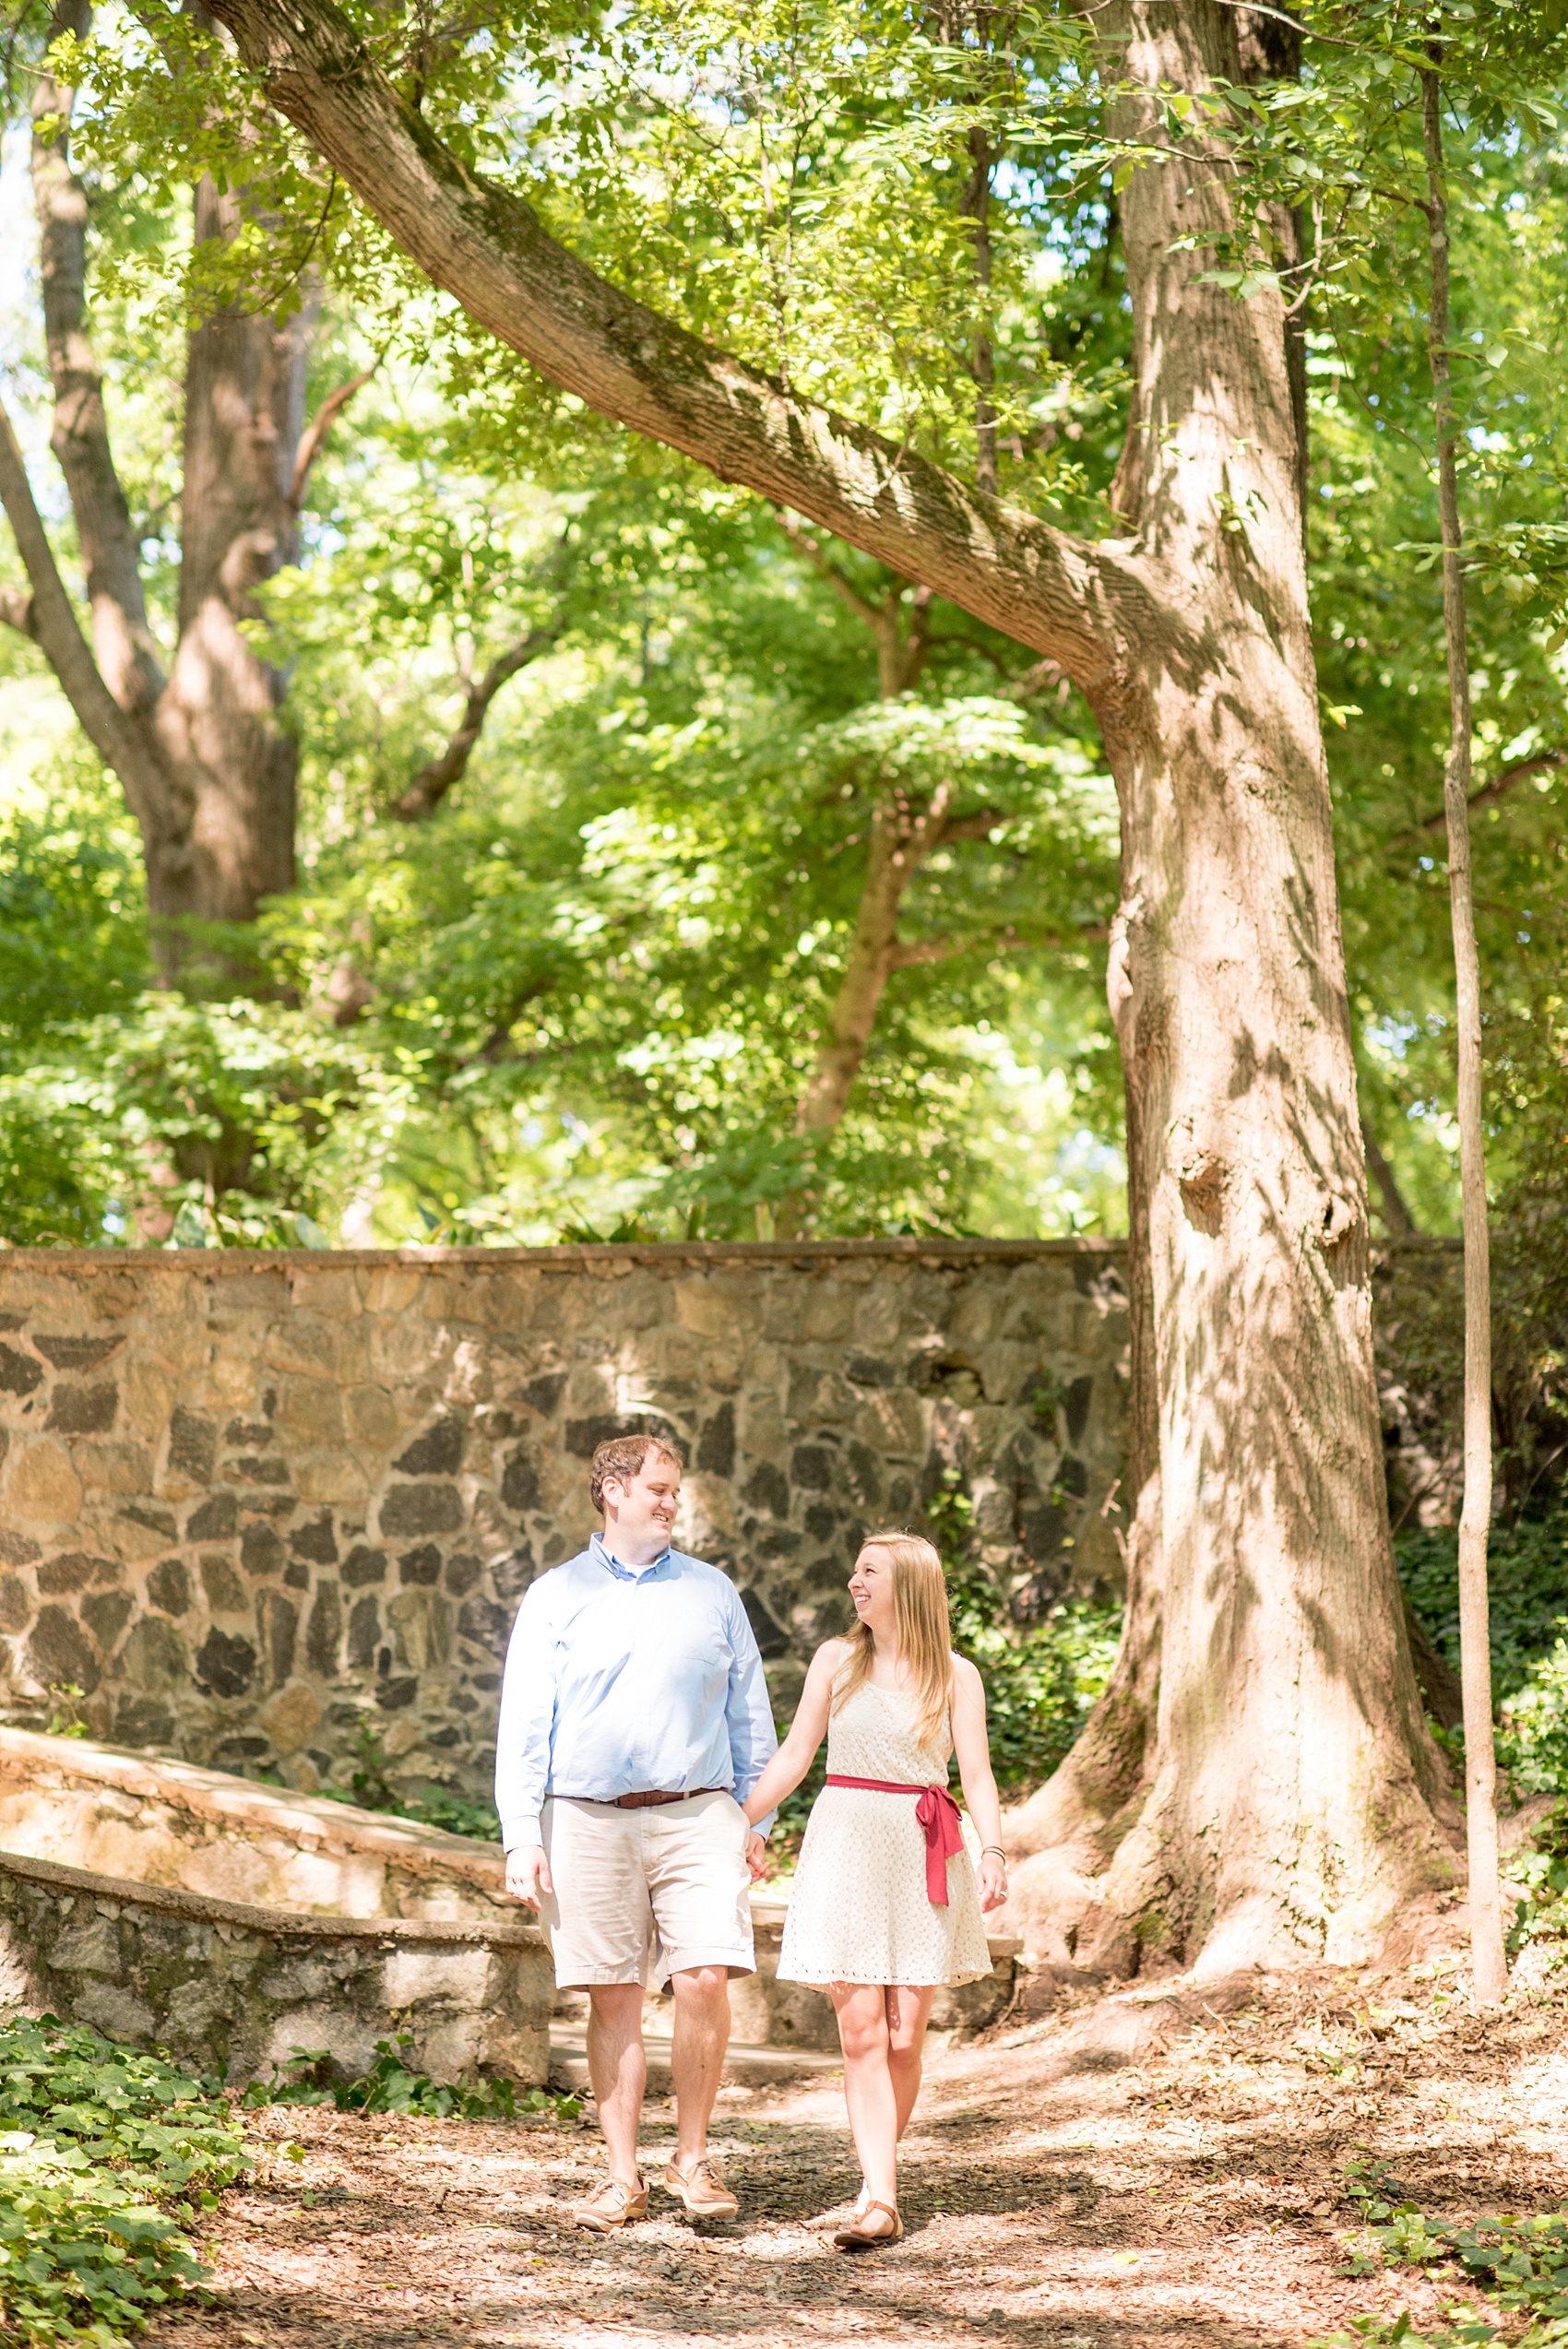 Mikkel Paige Photography engagement photos in Raleigh Rose Garden.